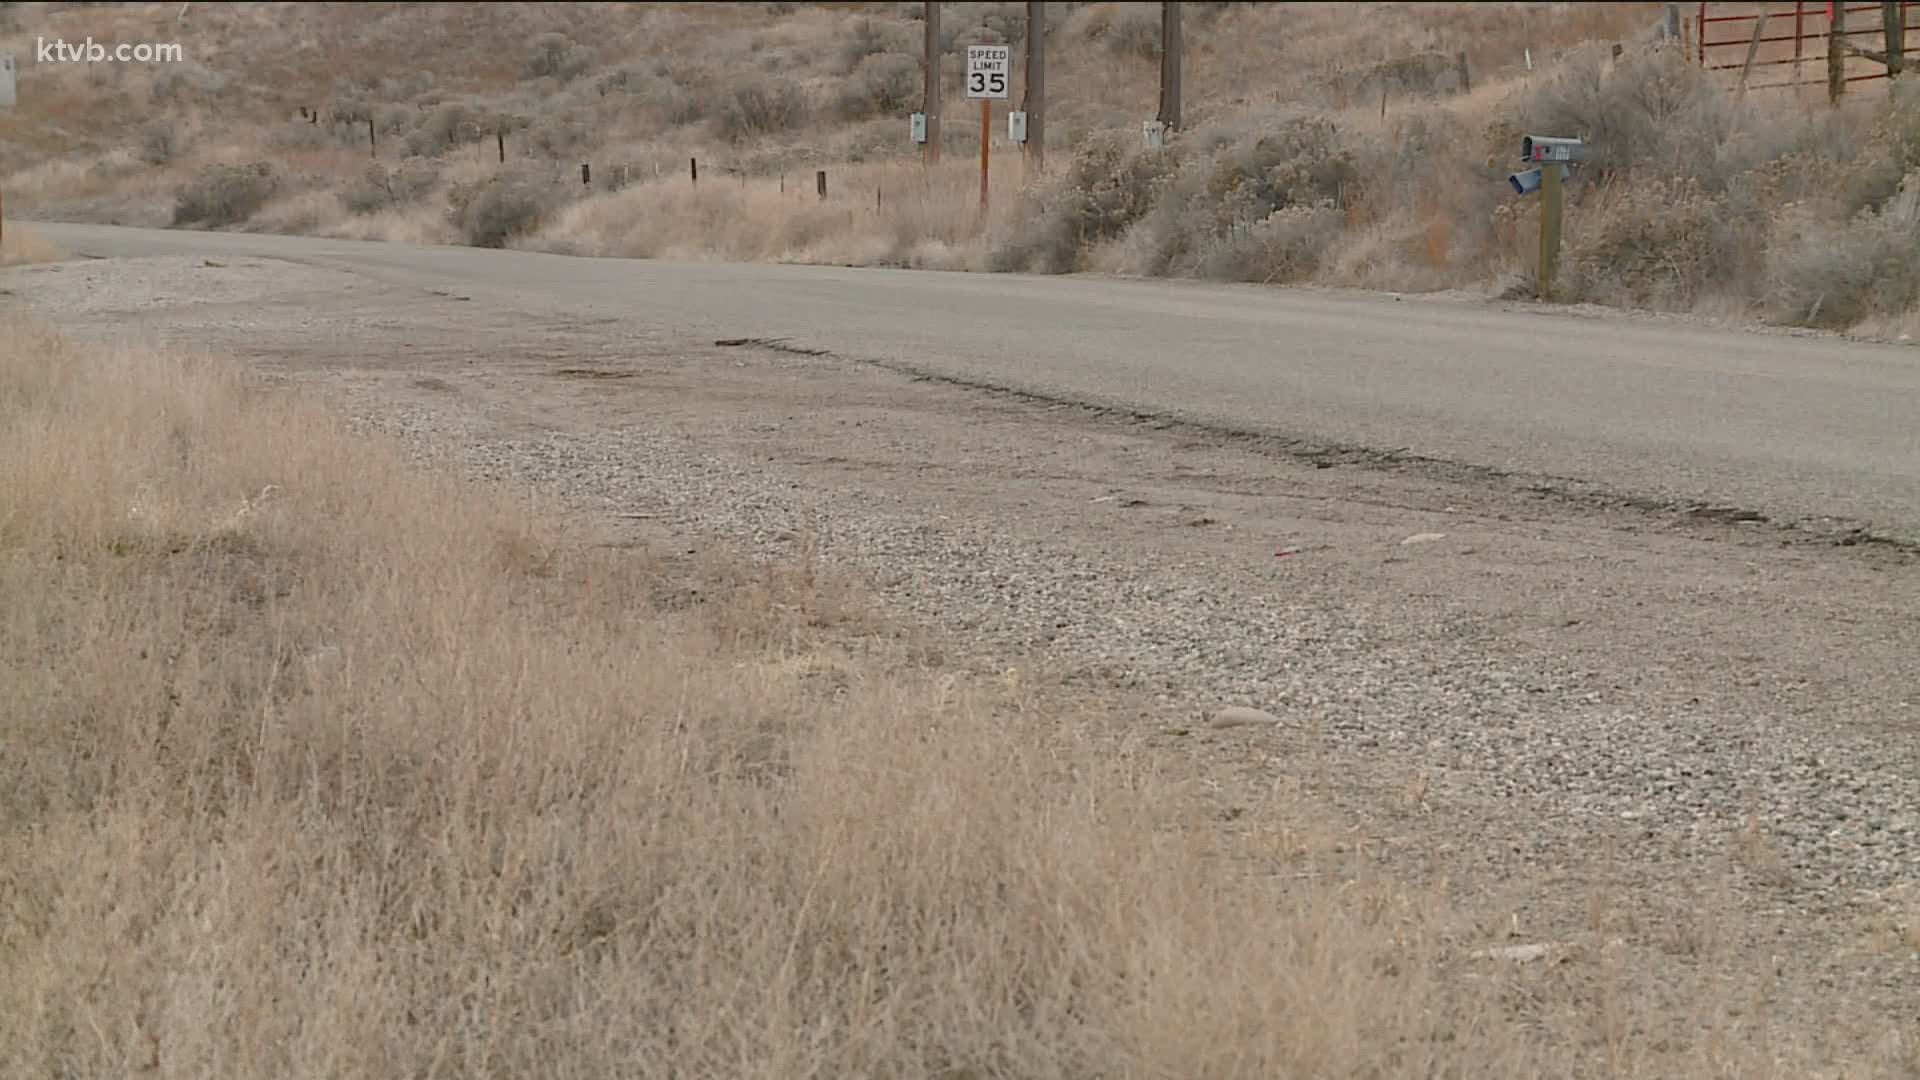 Conservation officers say more than two dozen dead birds were found dumped in an area north of Emmett.